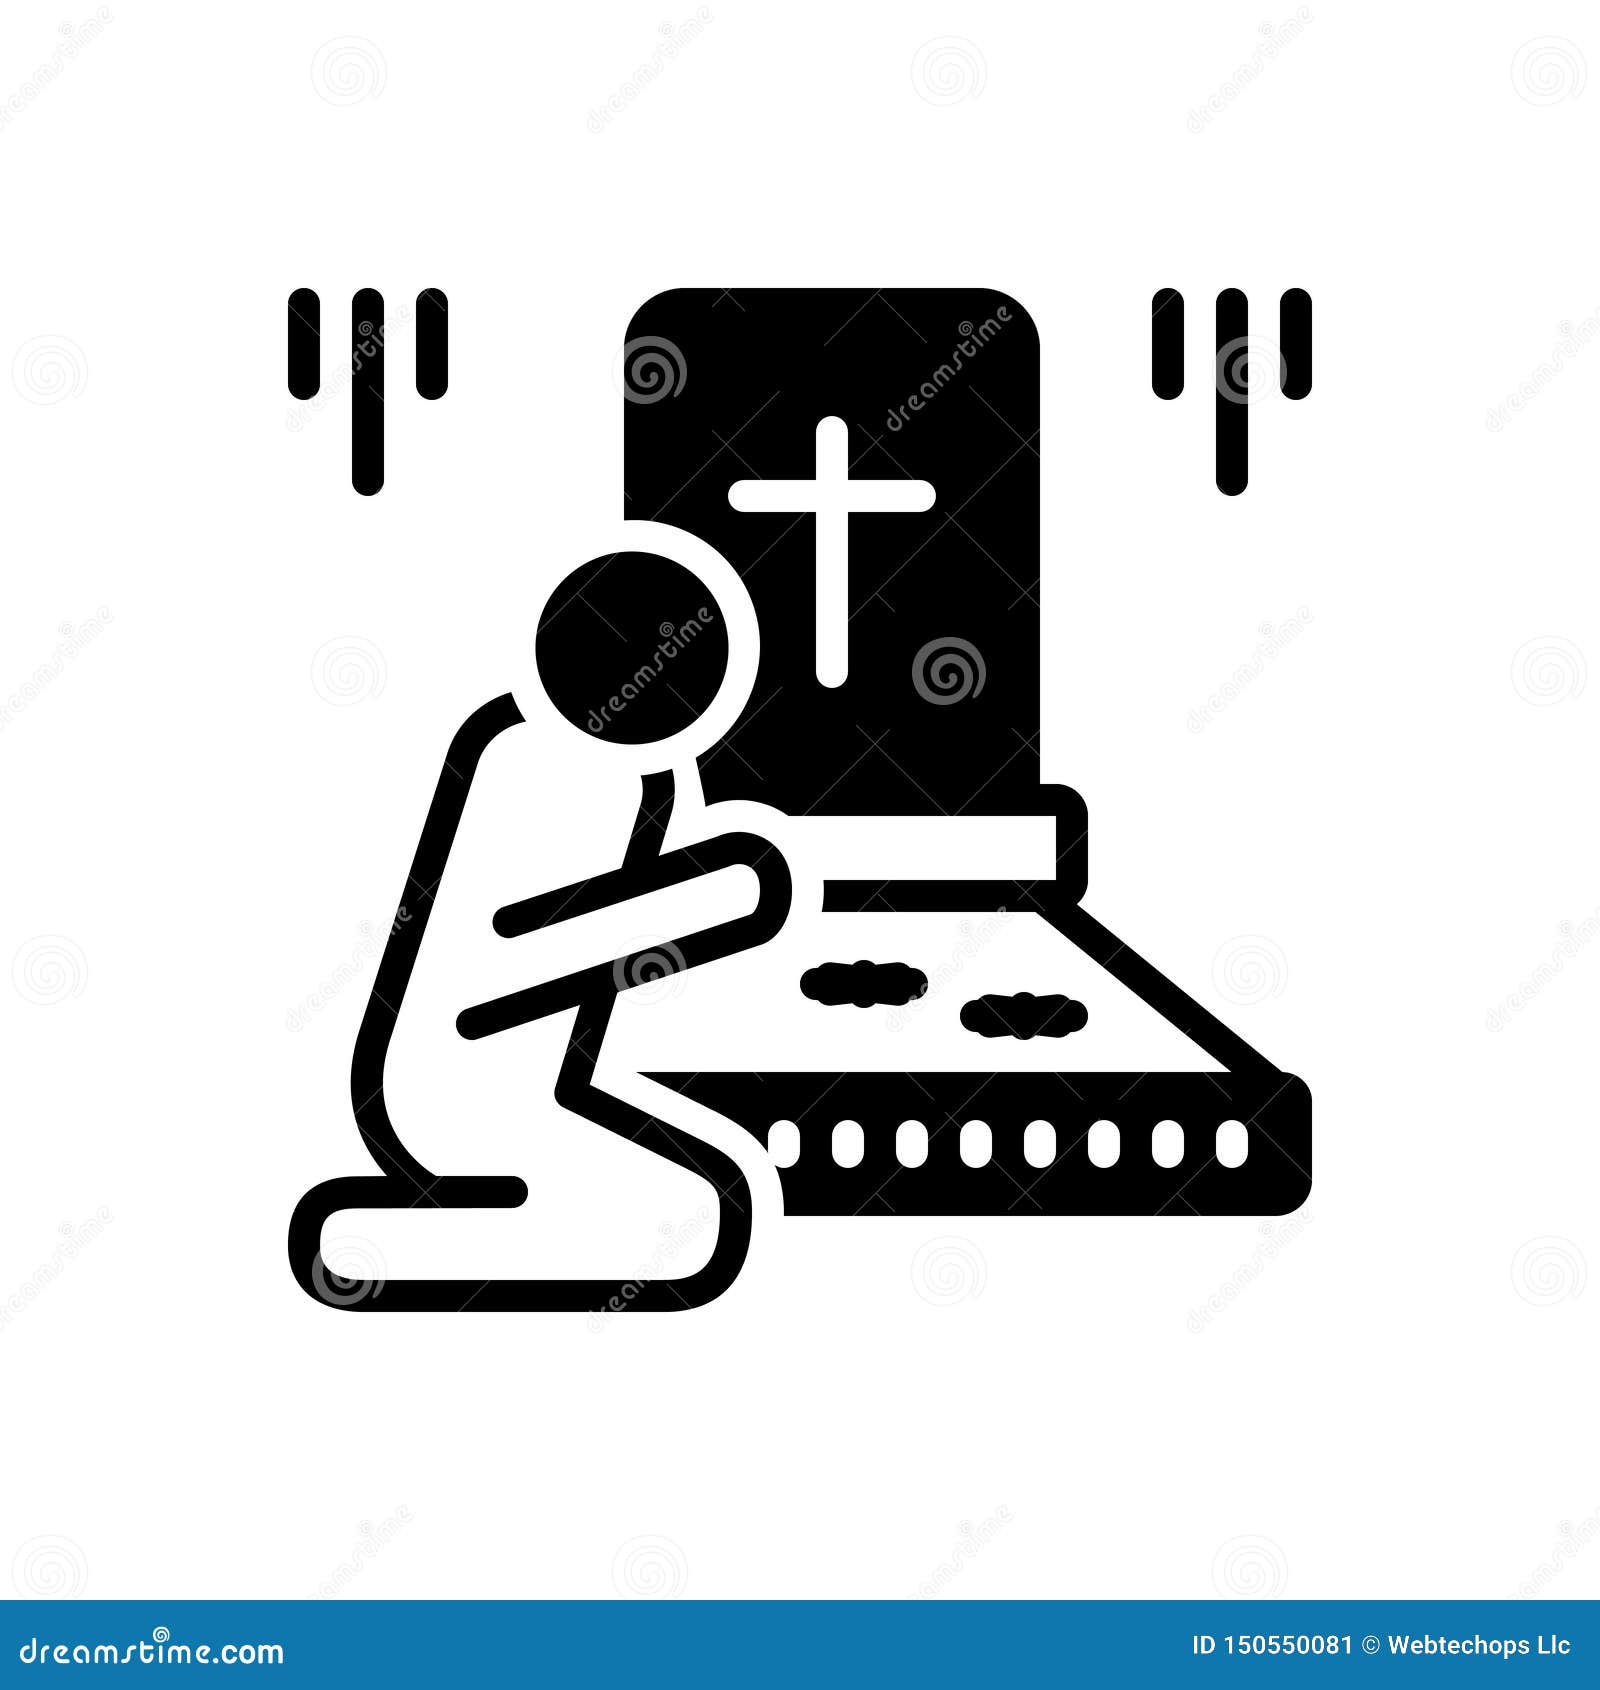 black solid icon for bereaved, graveyard and funeral